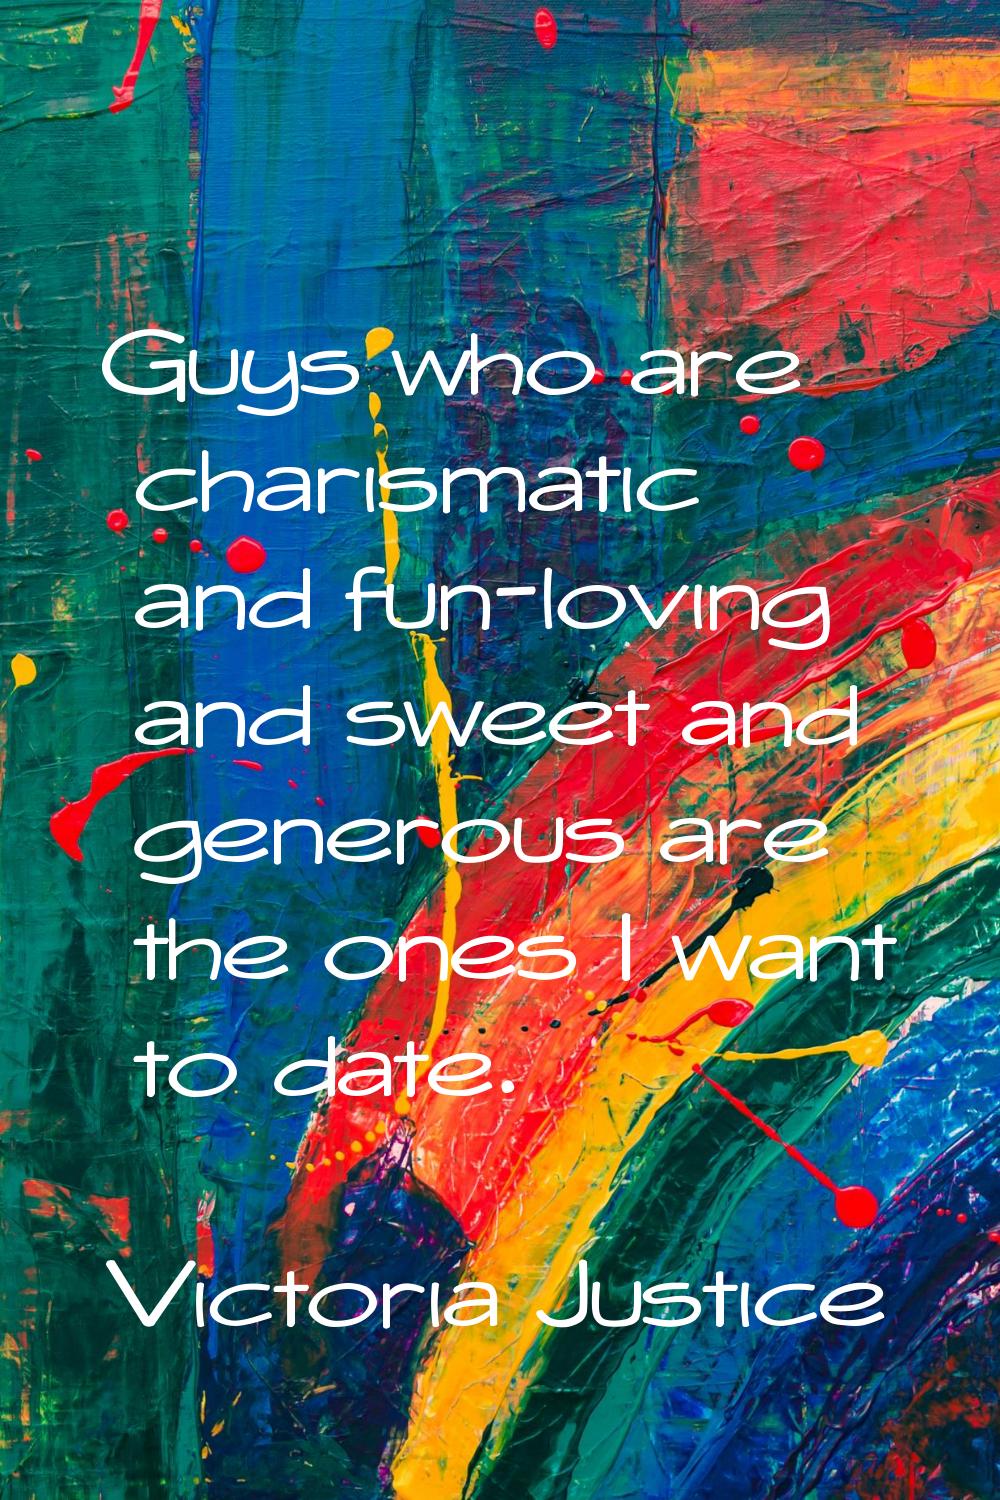 Guys who are charismatic and fun-loving and sweet and generous are the ones I want to date.